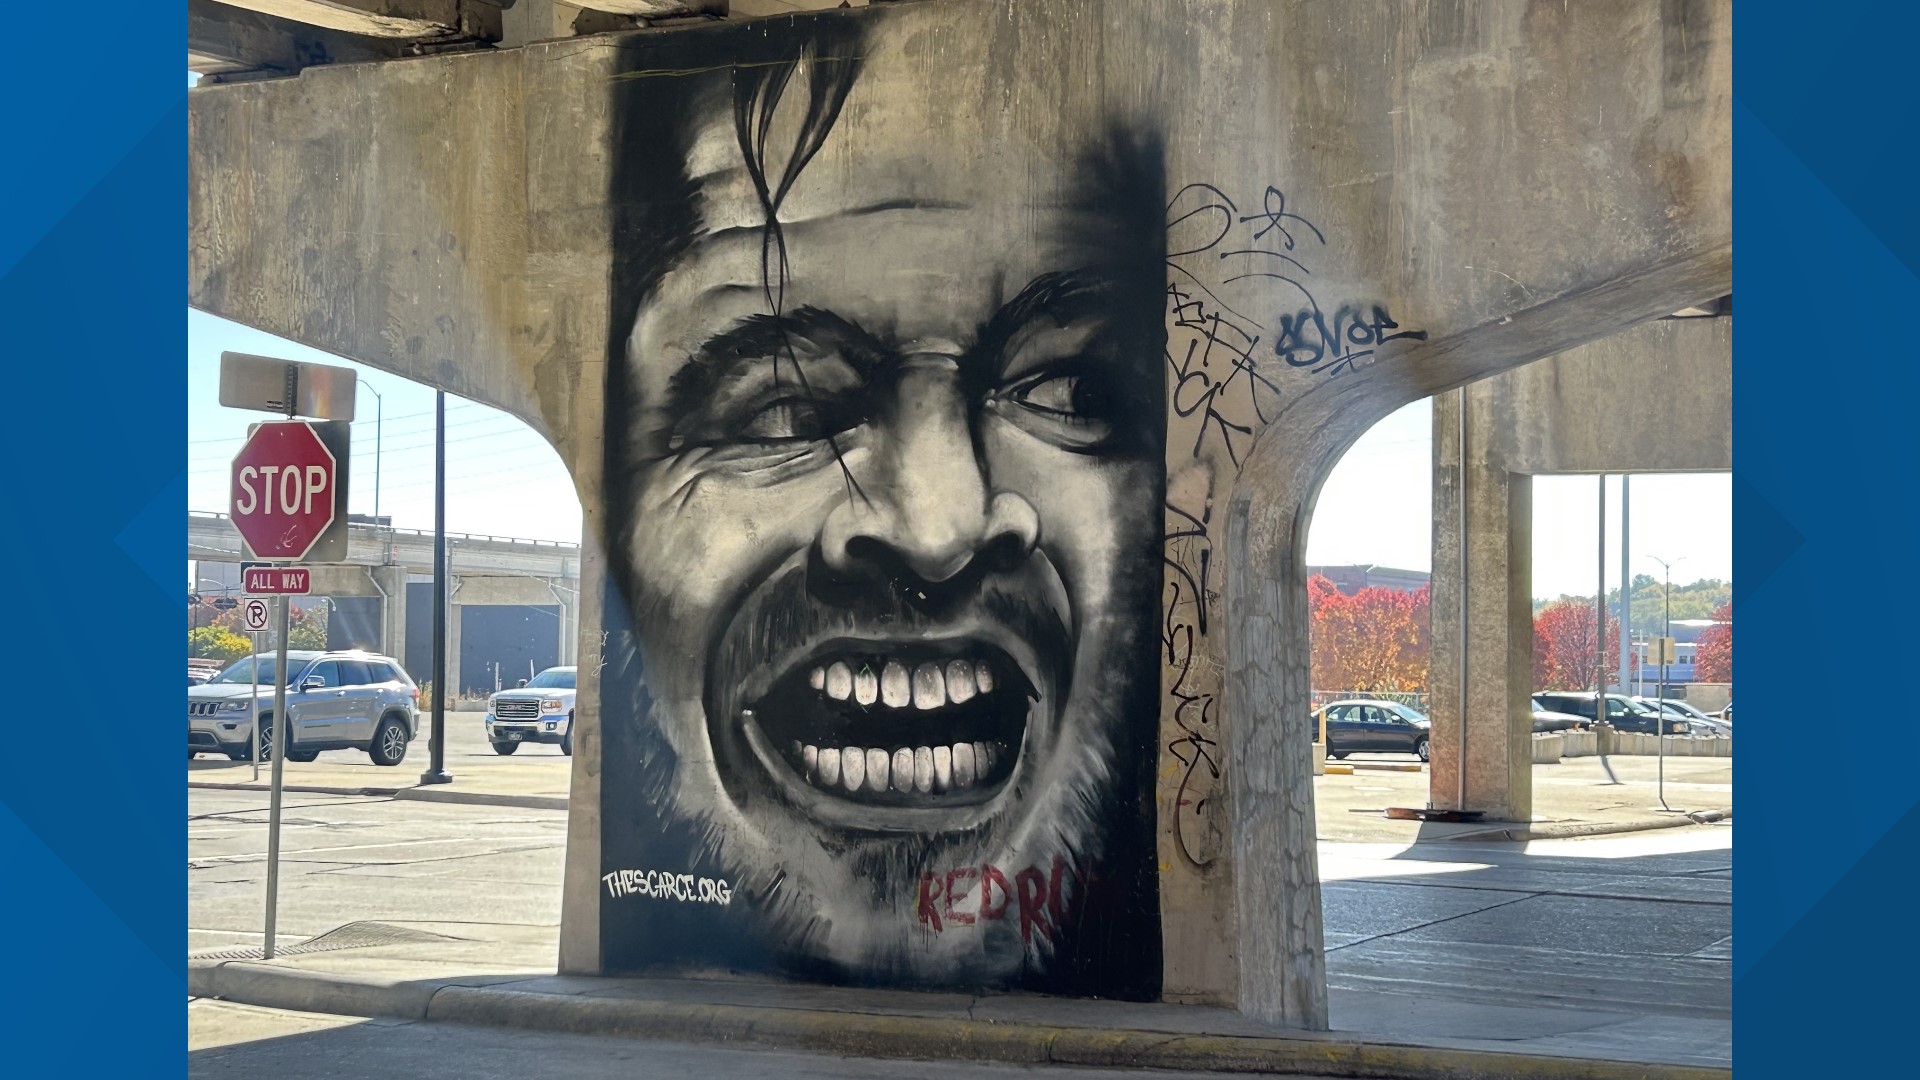 Anonymous Des Moines 'The Shining' mural could be destroyed